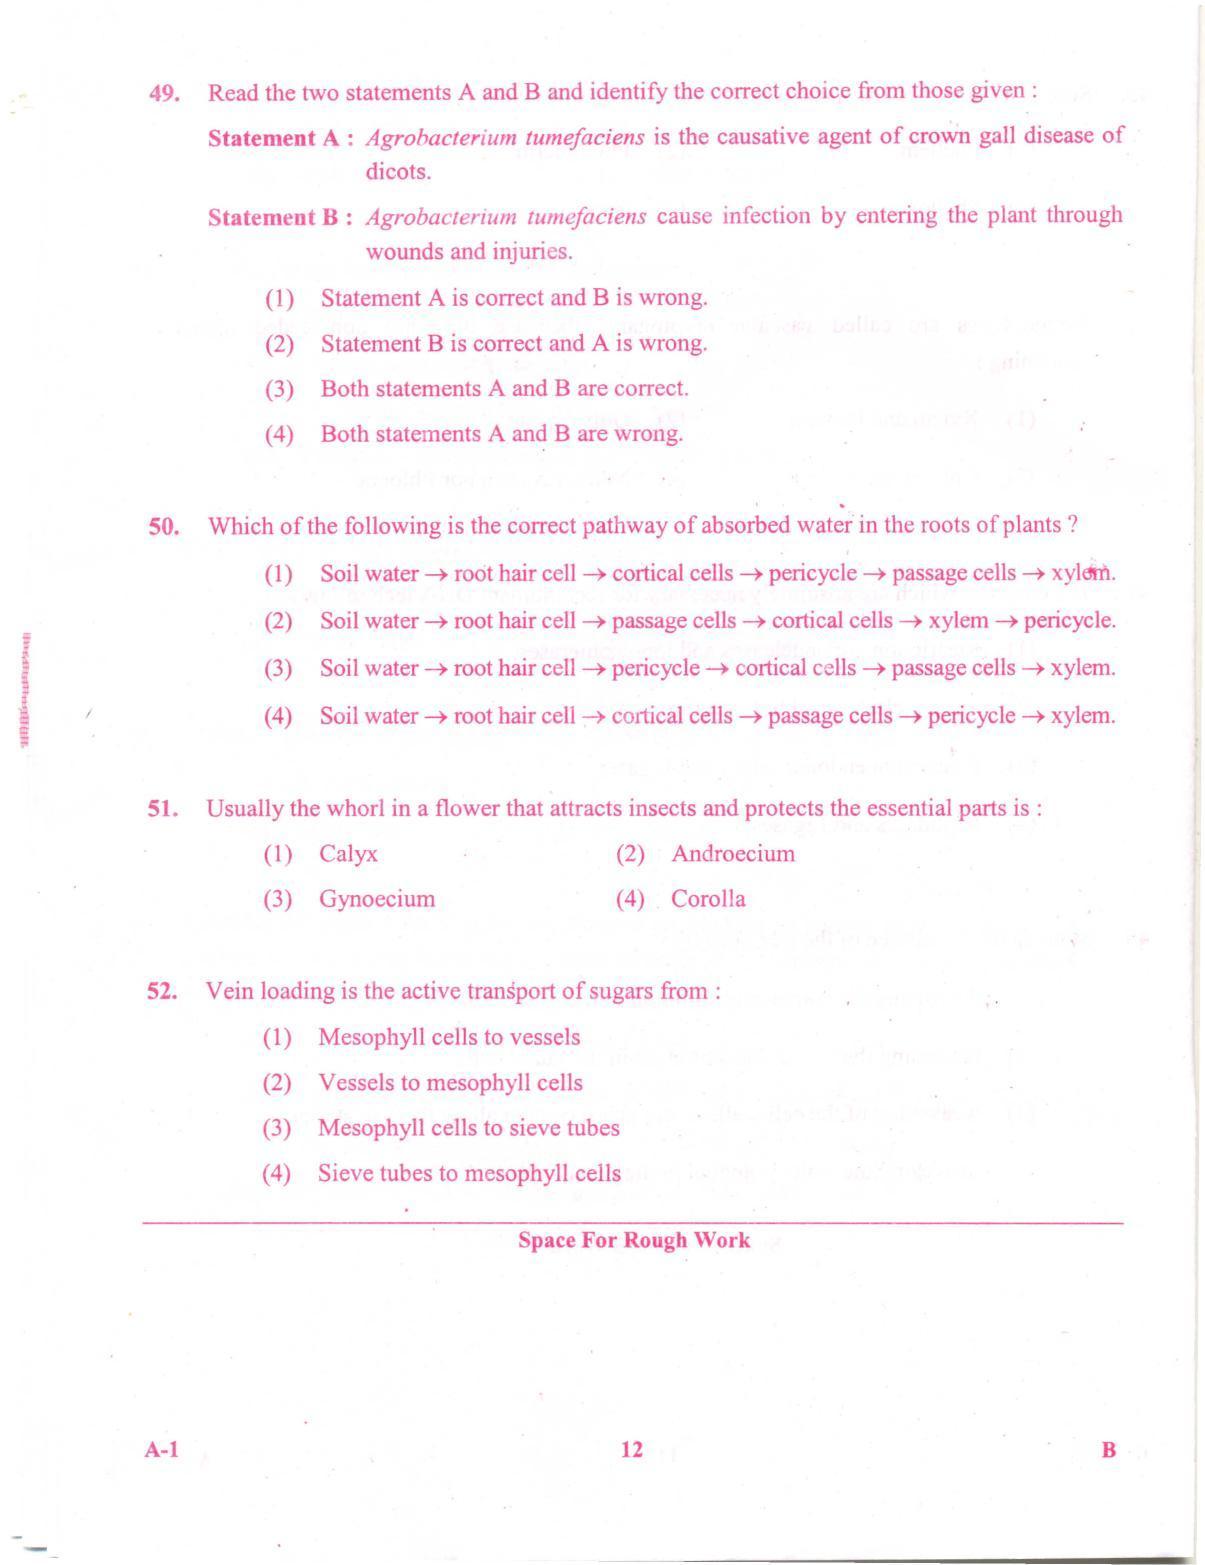 KCET Biology 2012 Question Papers - Page 12